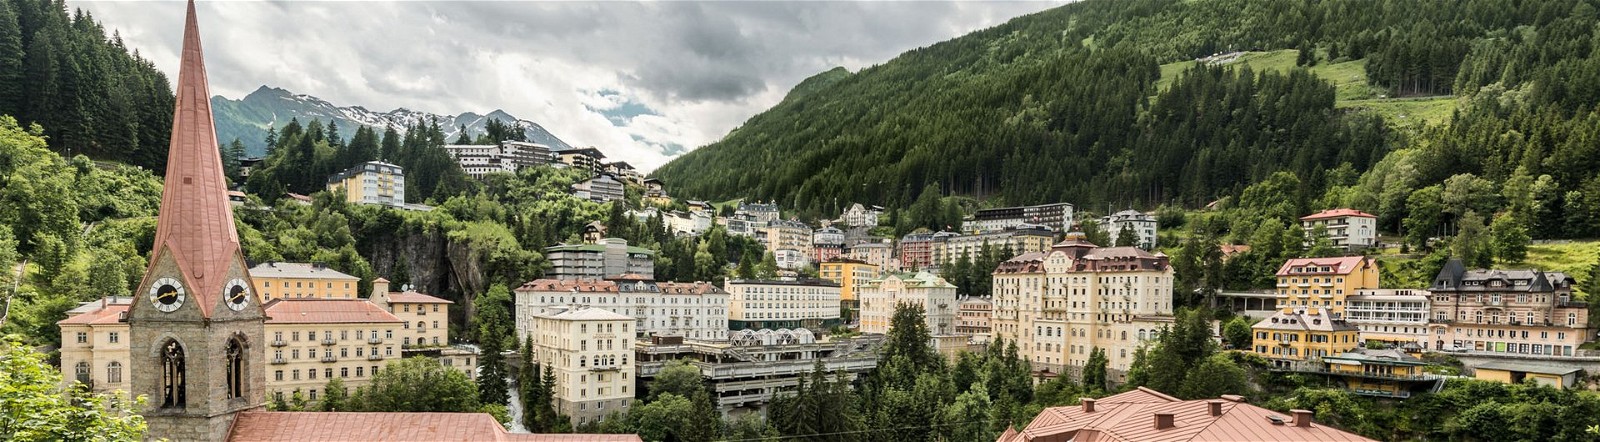 Bad Gastein offers a wide range of accommodation options to suit various budgets and preferences. Whether you're seeking luxury and indulgence or a cozy and budget-friendly retreat, you'll find the perfect place to stay while exploring the beauty of this alpine town.